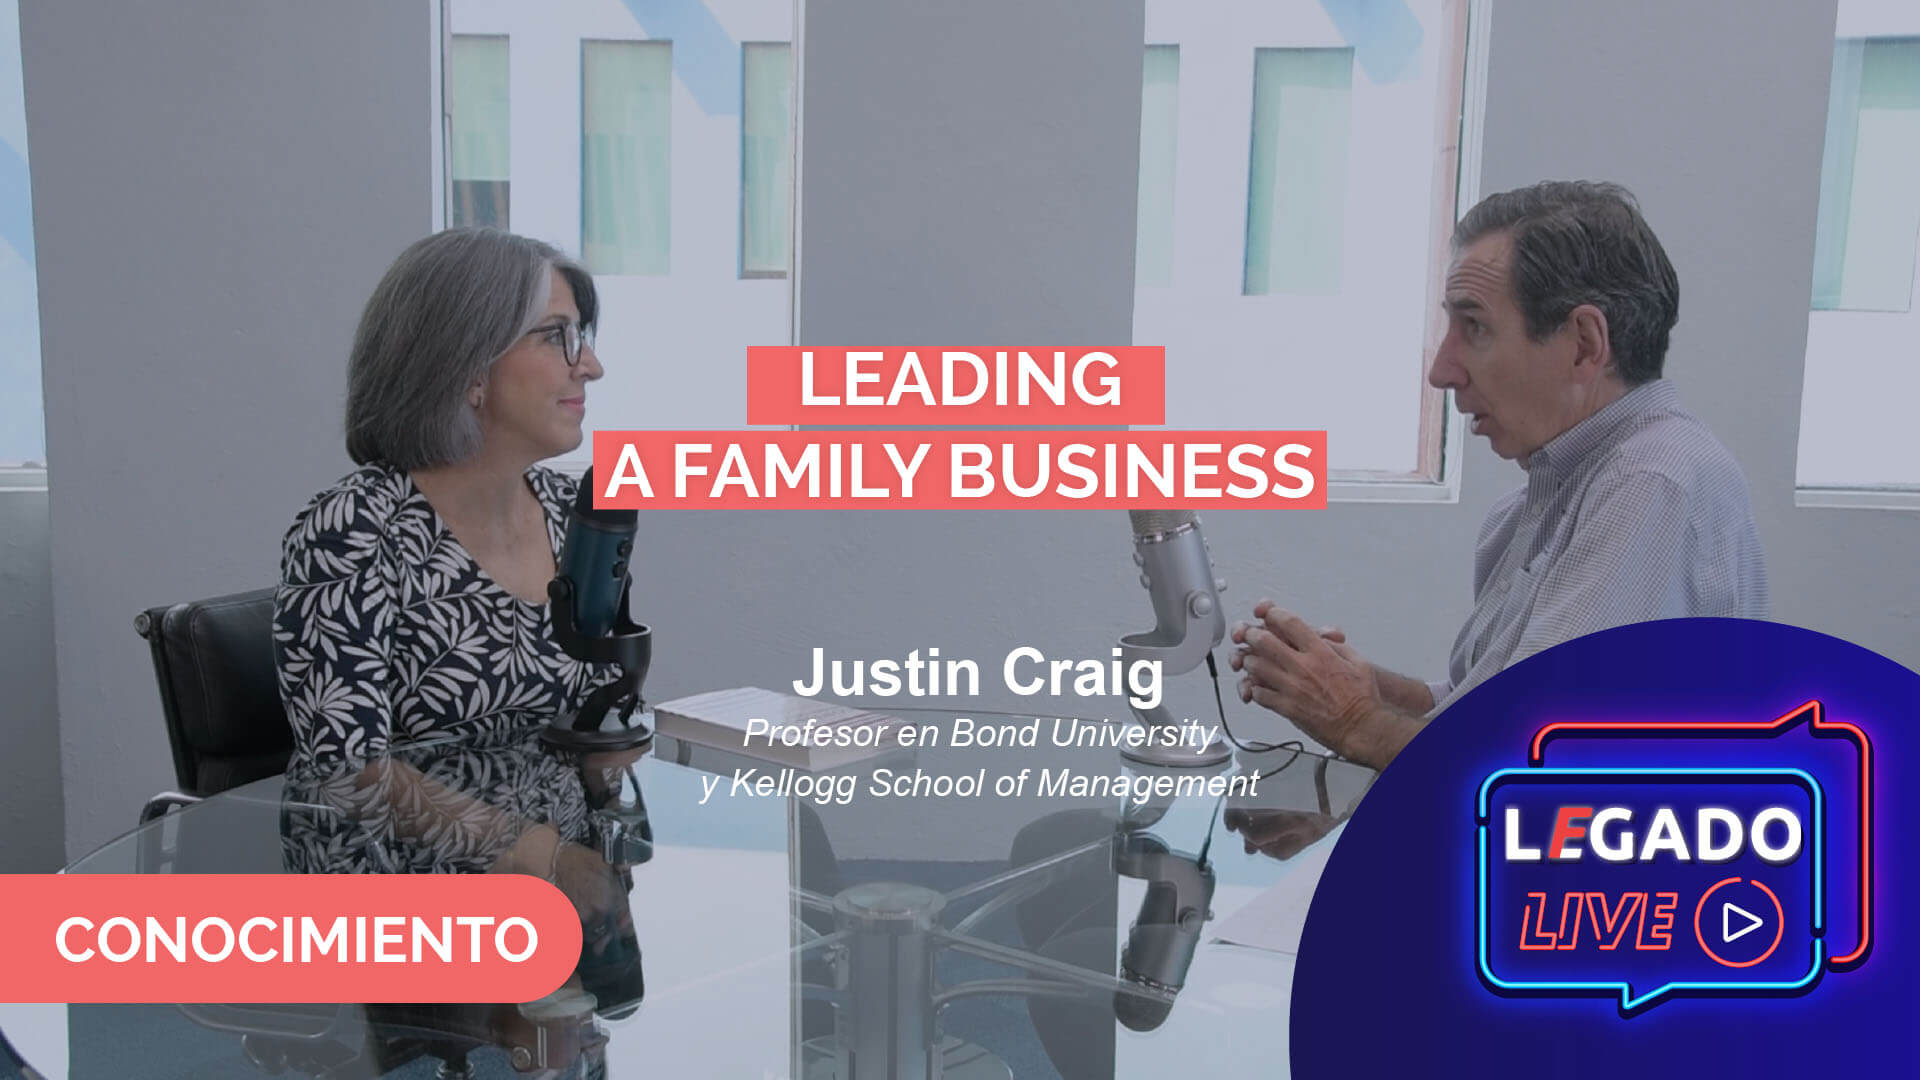 Leading a family business, Justin Craig